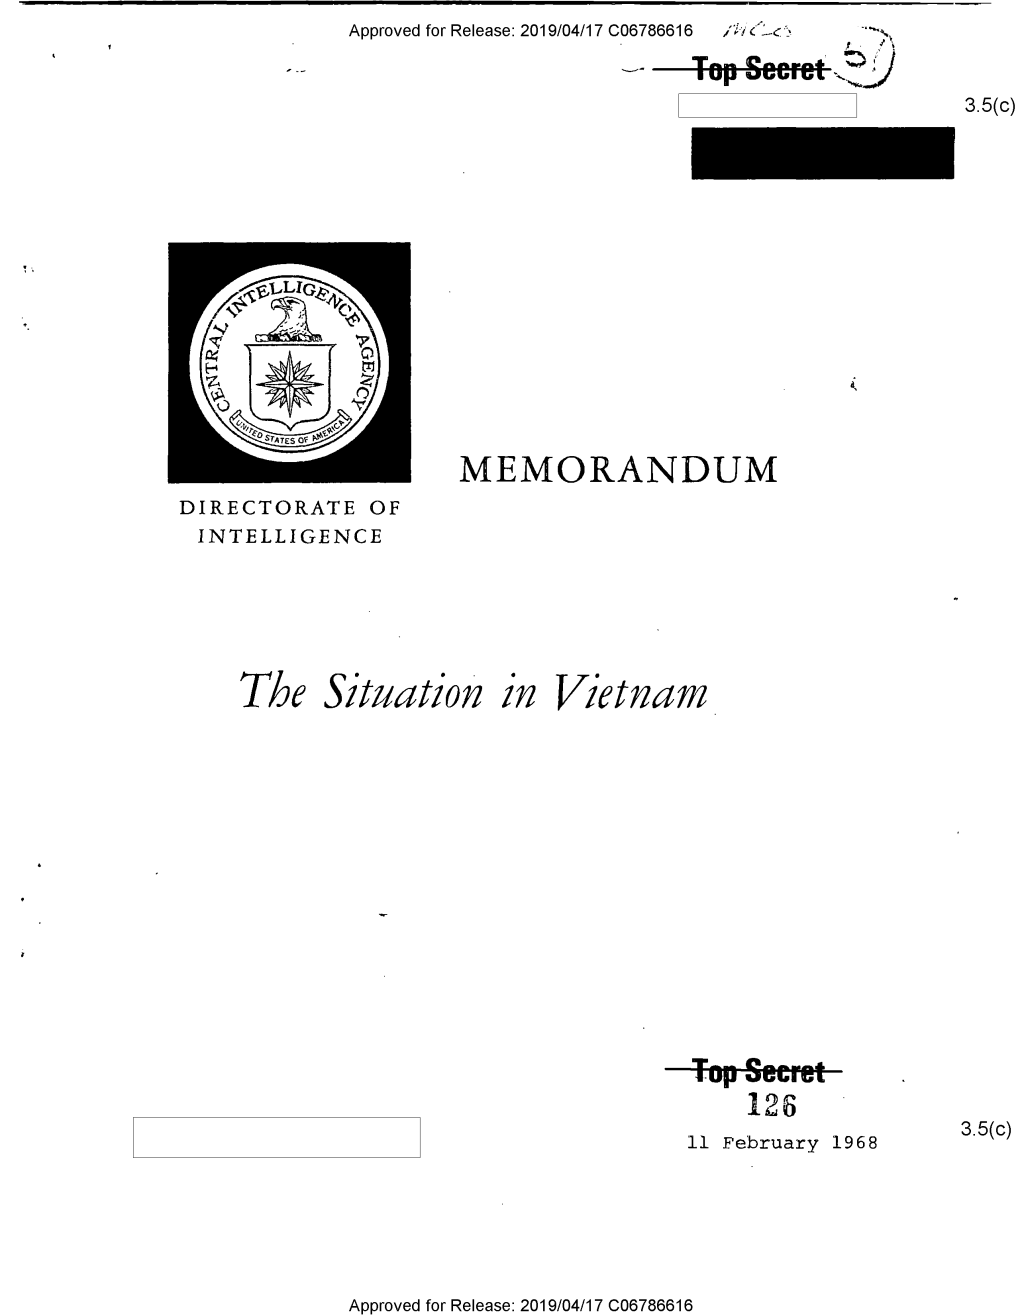 Report on the Situation in Vietnam, 11 February 1968